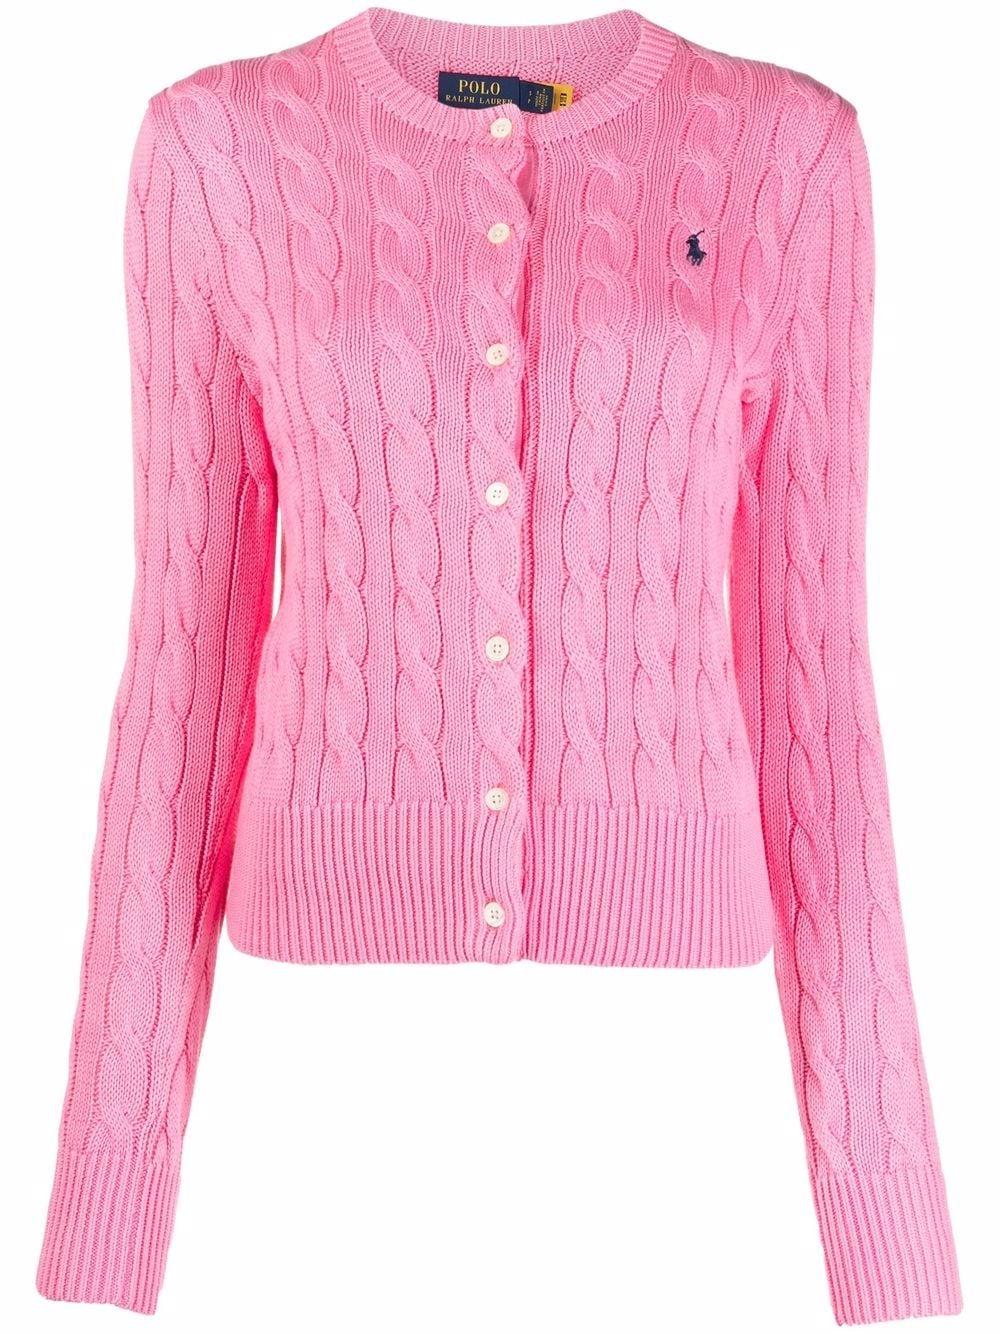 Polo Ralph Lauren Cable-knit Button-up Cardigan in Pink | Lyst Australia